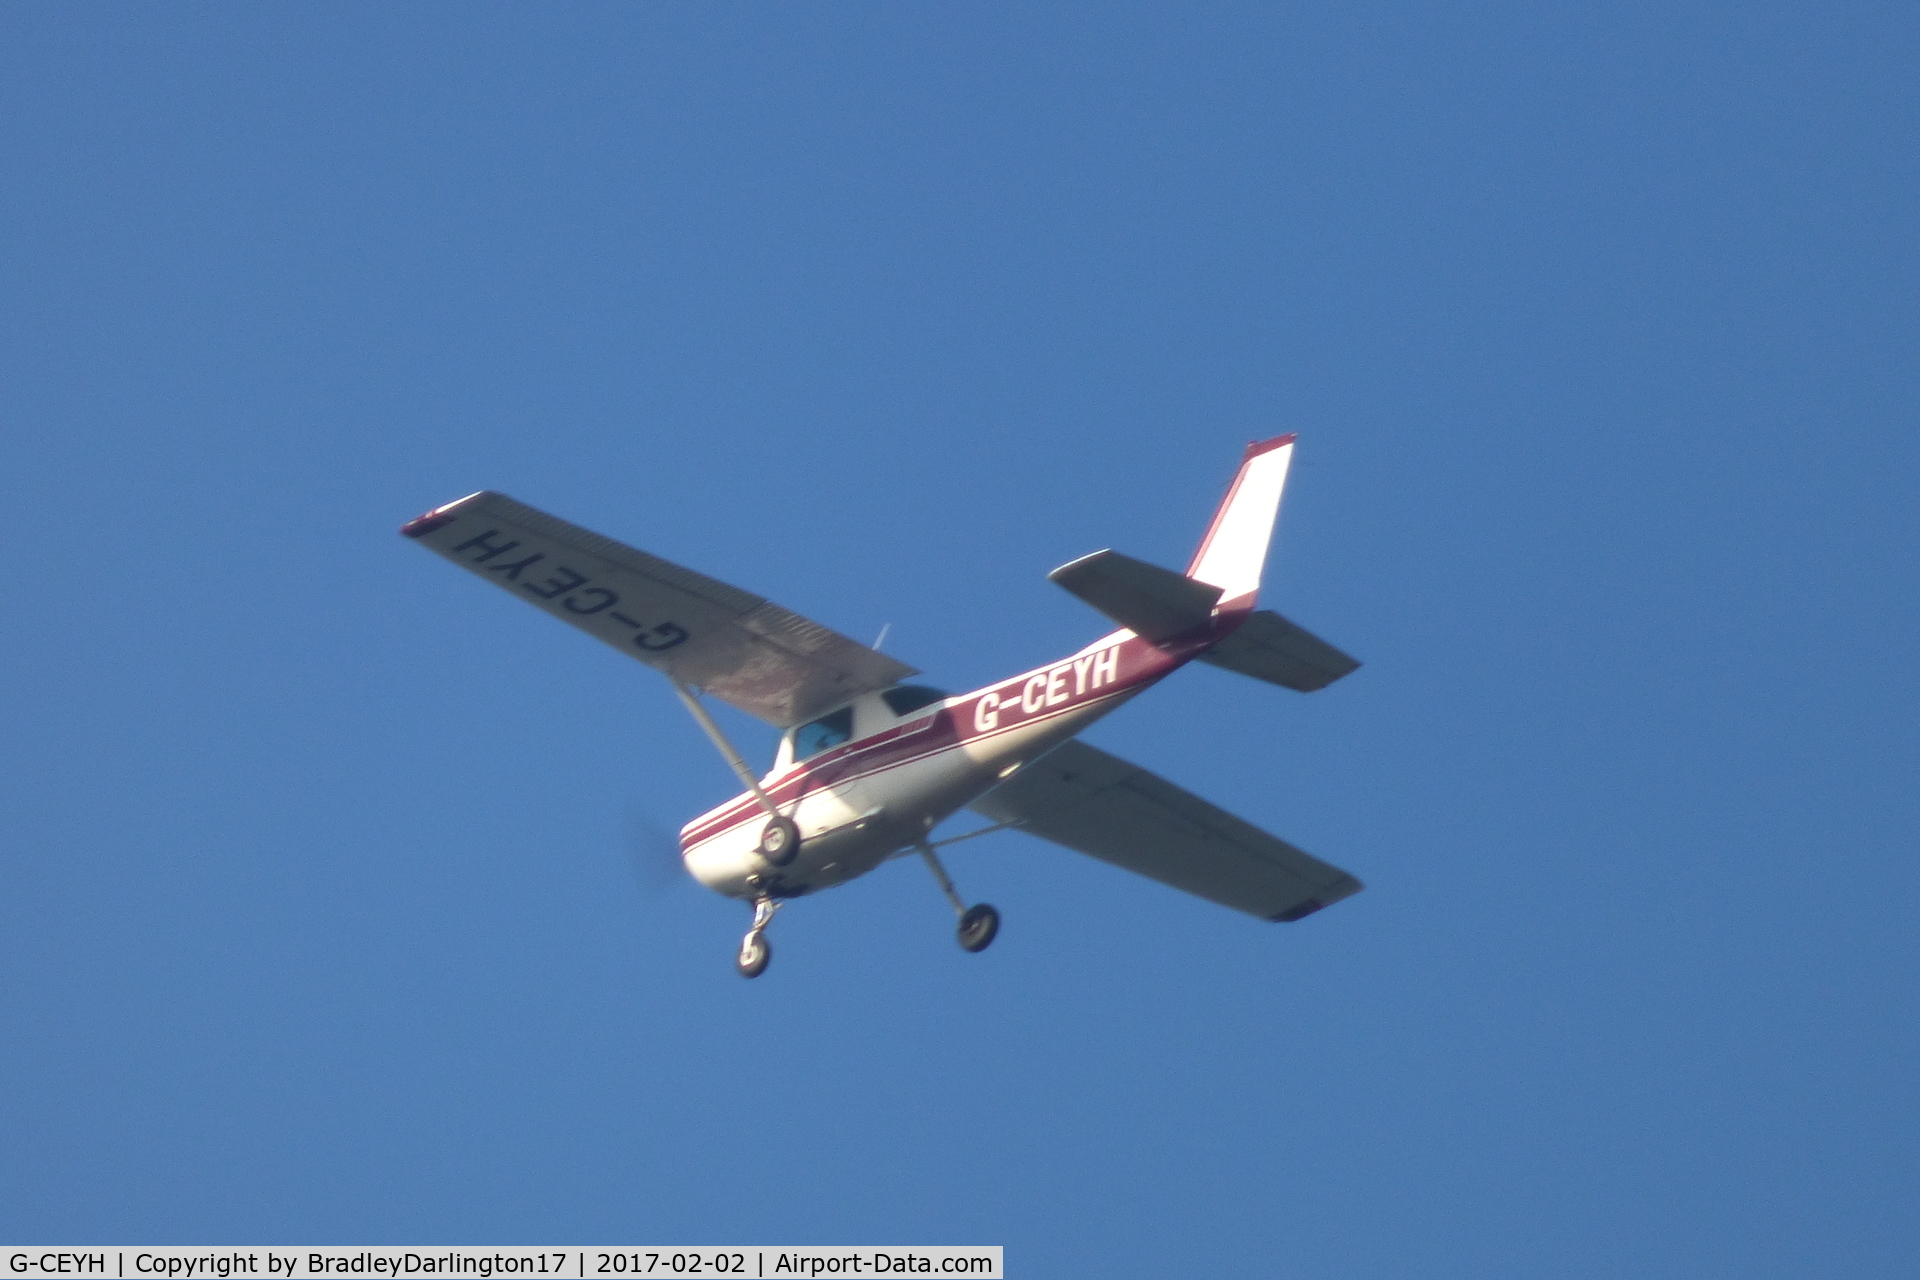 G-CEYH, 1978 Cessna 152 C/N 15282689, Cornwall Flying Club Flying Over Plymouth Airport